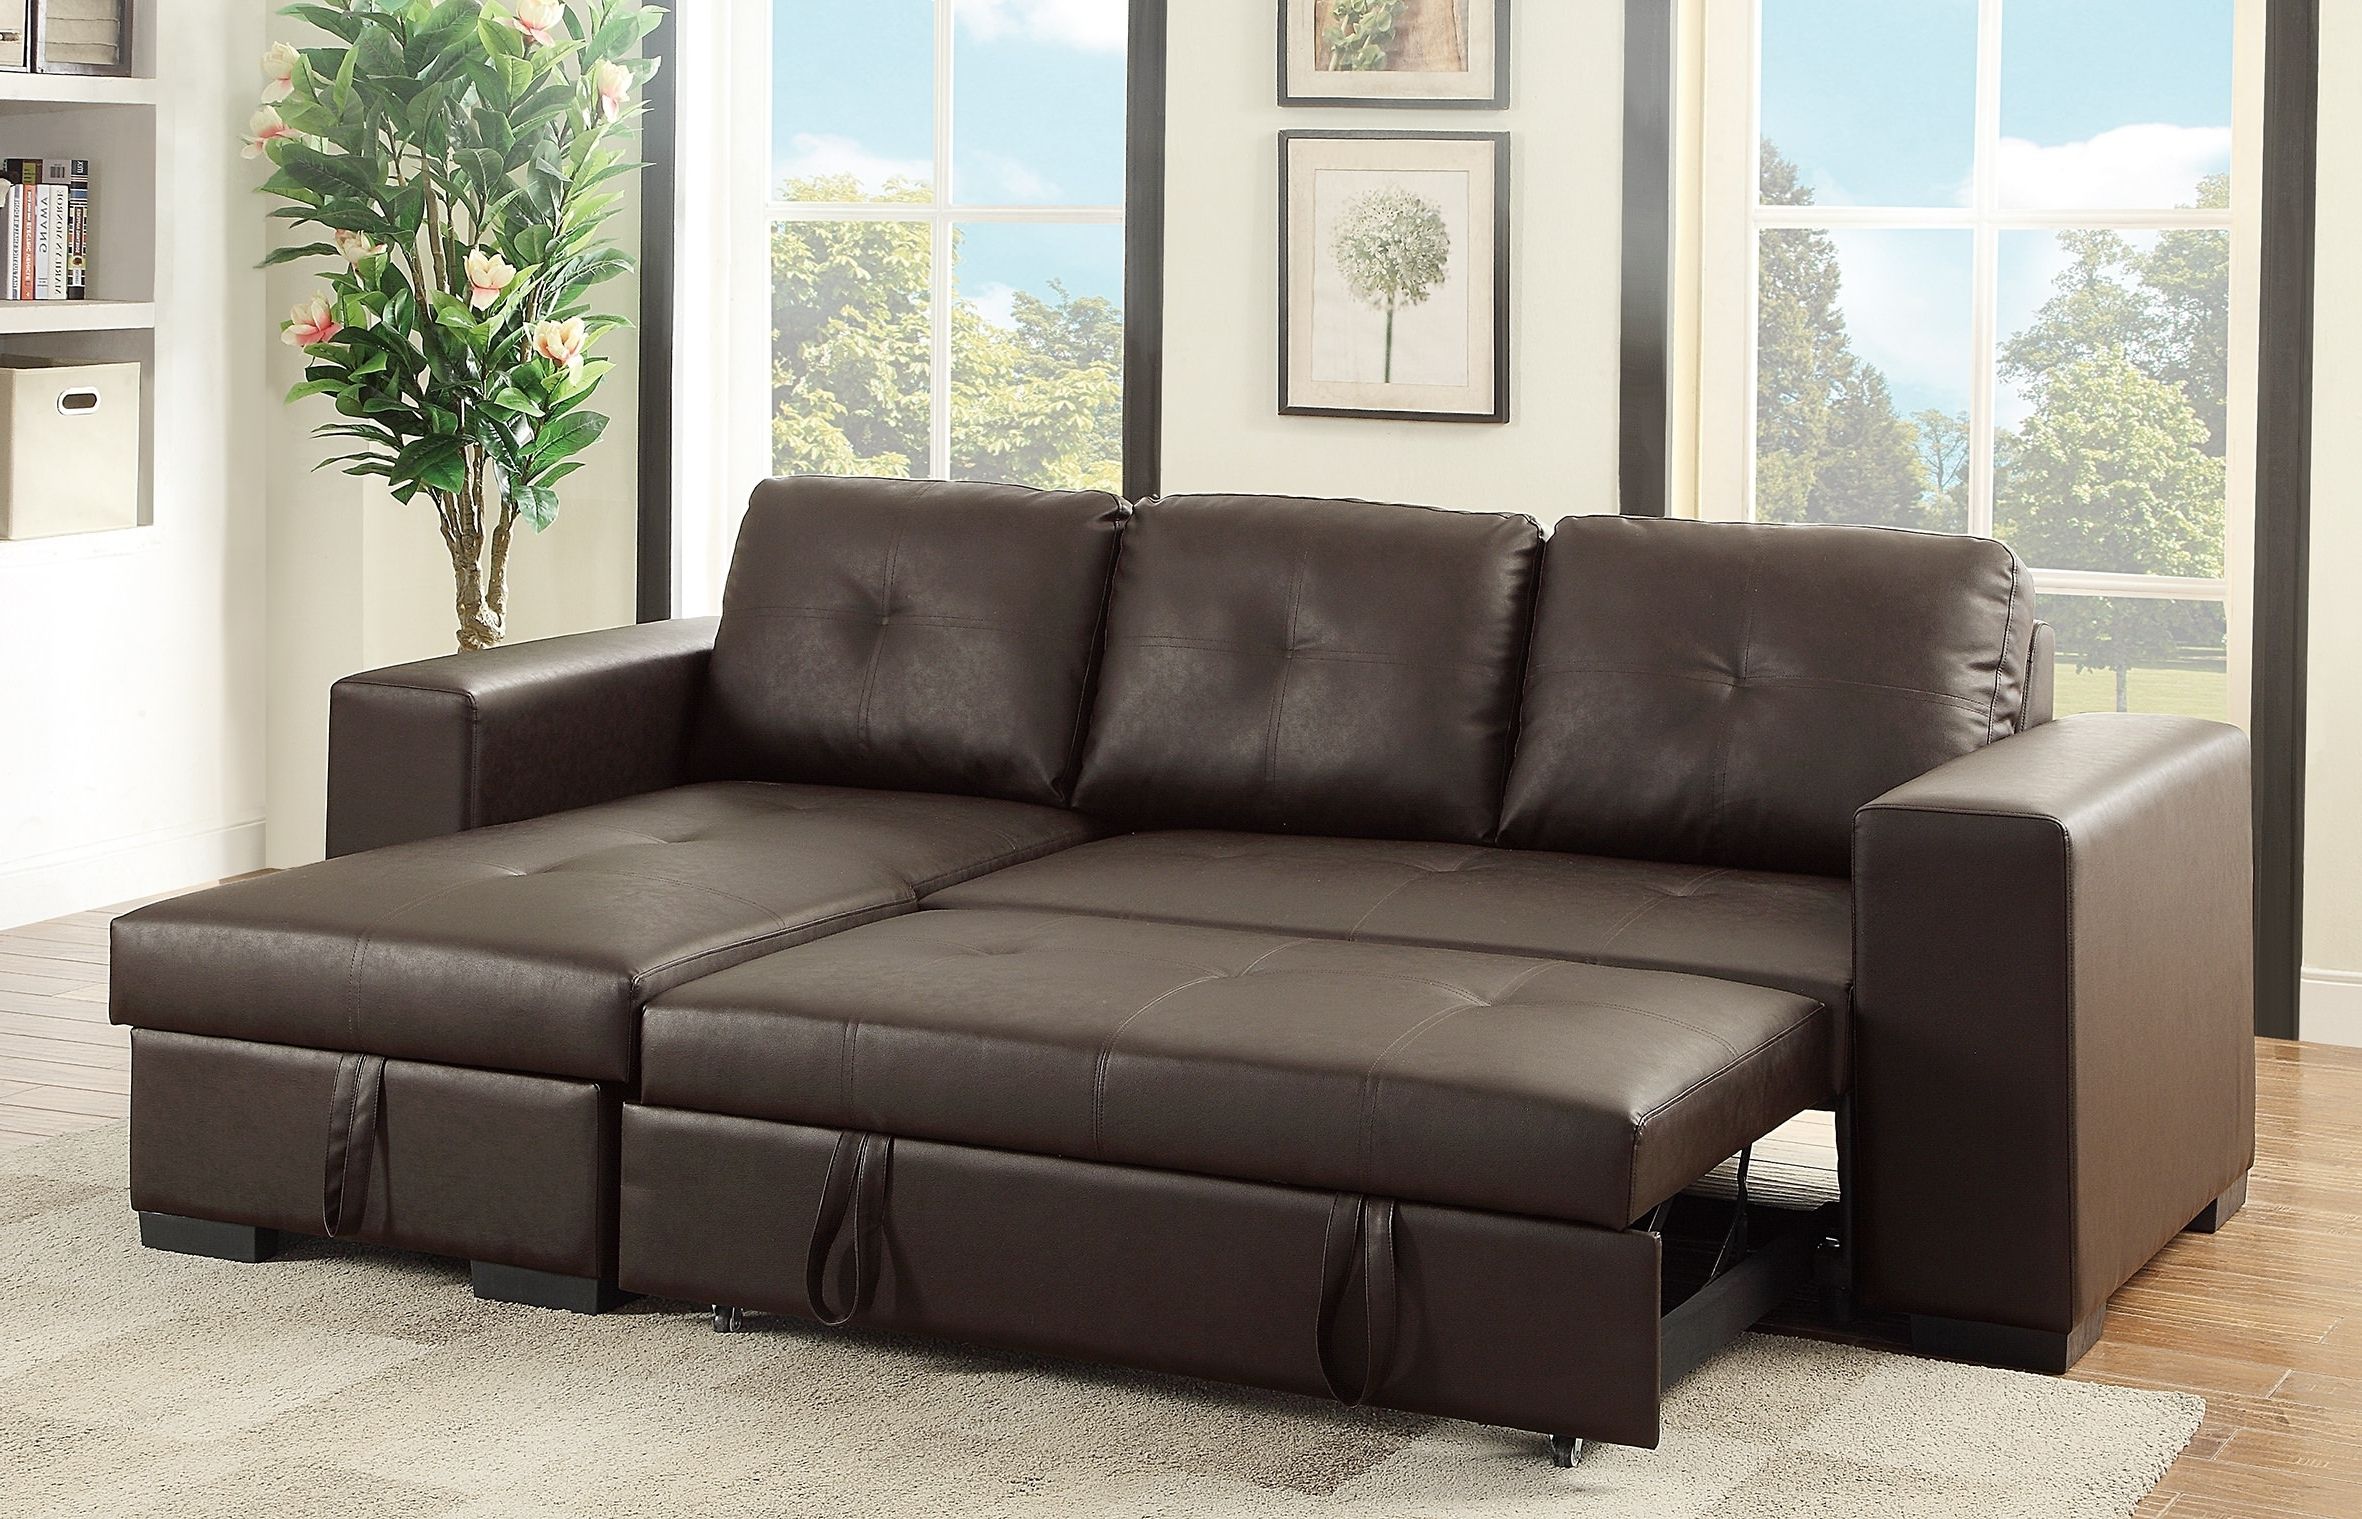 2018 F6930 Espresso Convertible Sectional Sofapoundex Within Convertible Sectional Sofas (View 1 of 20)